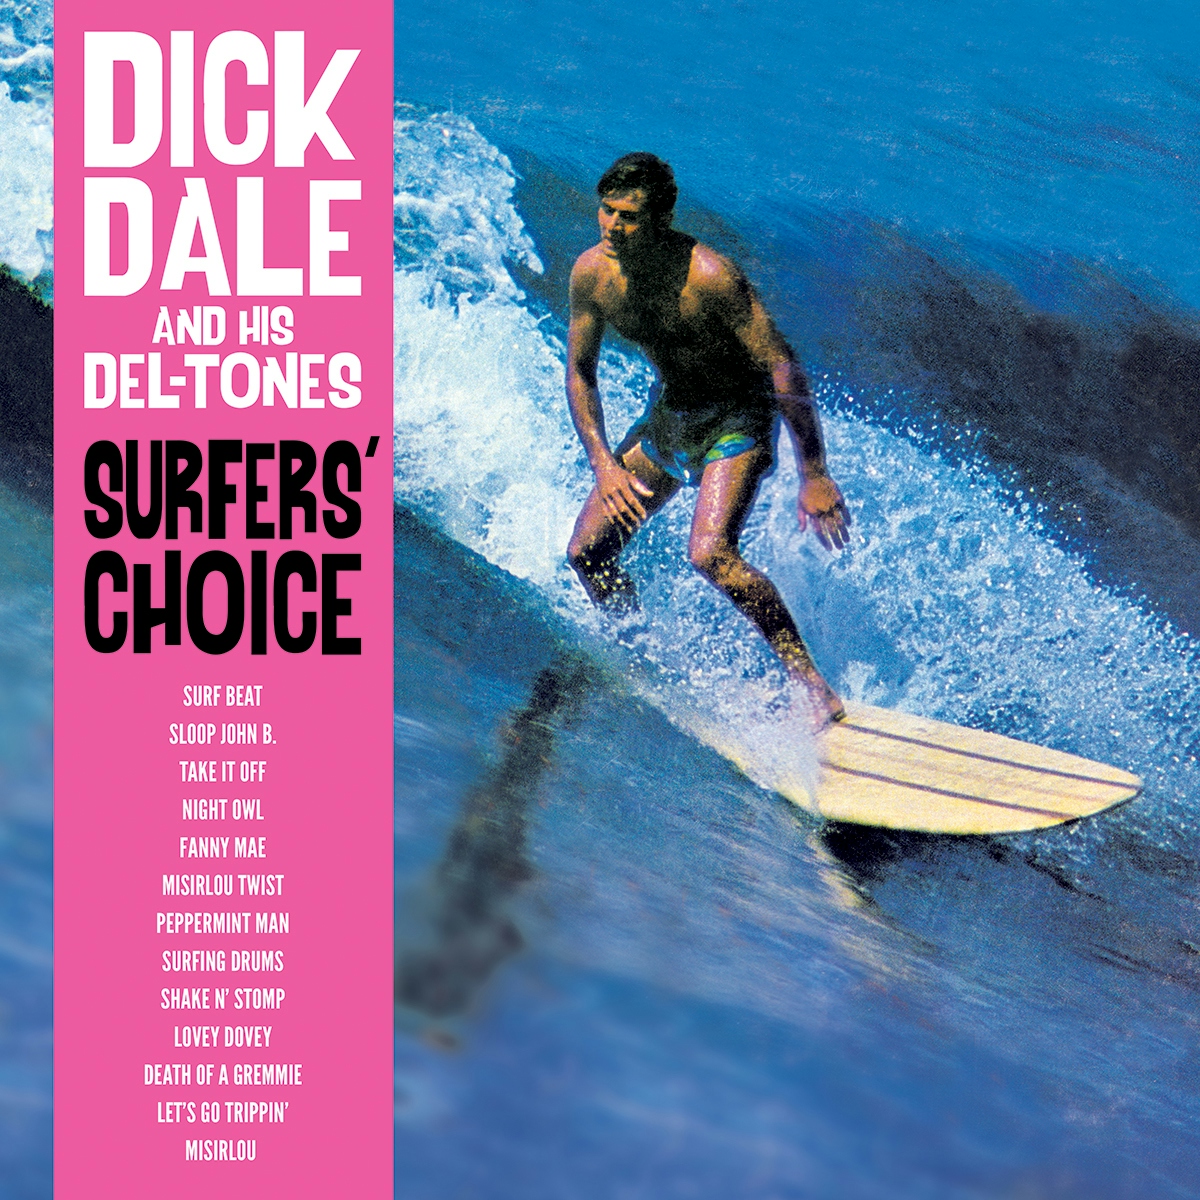 Album artwork for Album artwork for Surfer's Choice by Dick Dale and His Del-Tones by Surfer's Choice - Dick Dale and His Del-Tones